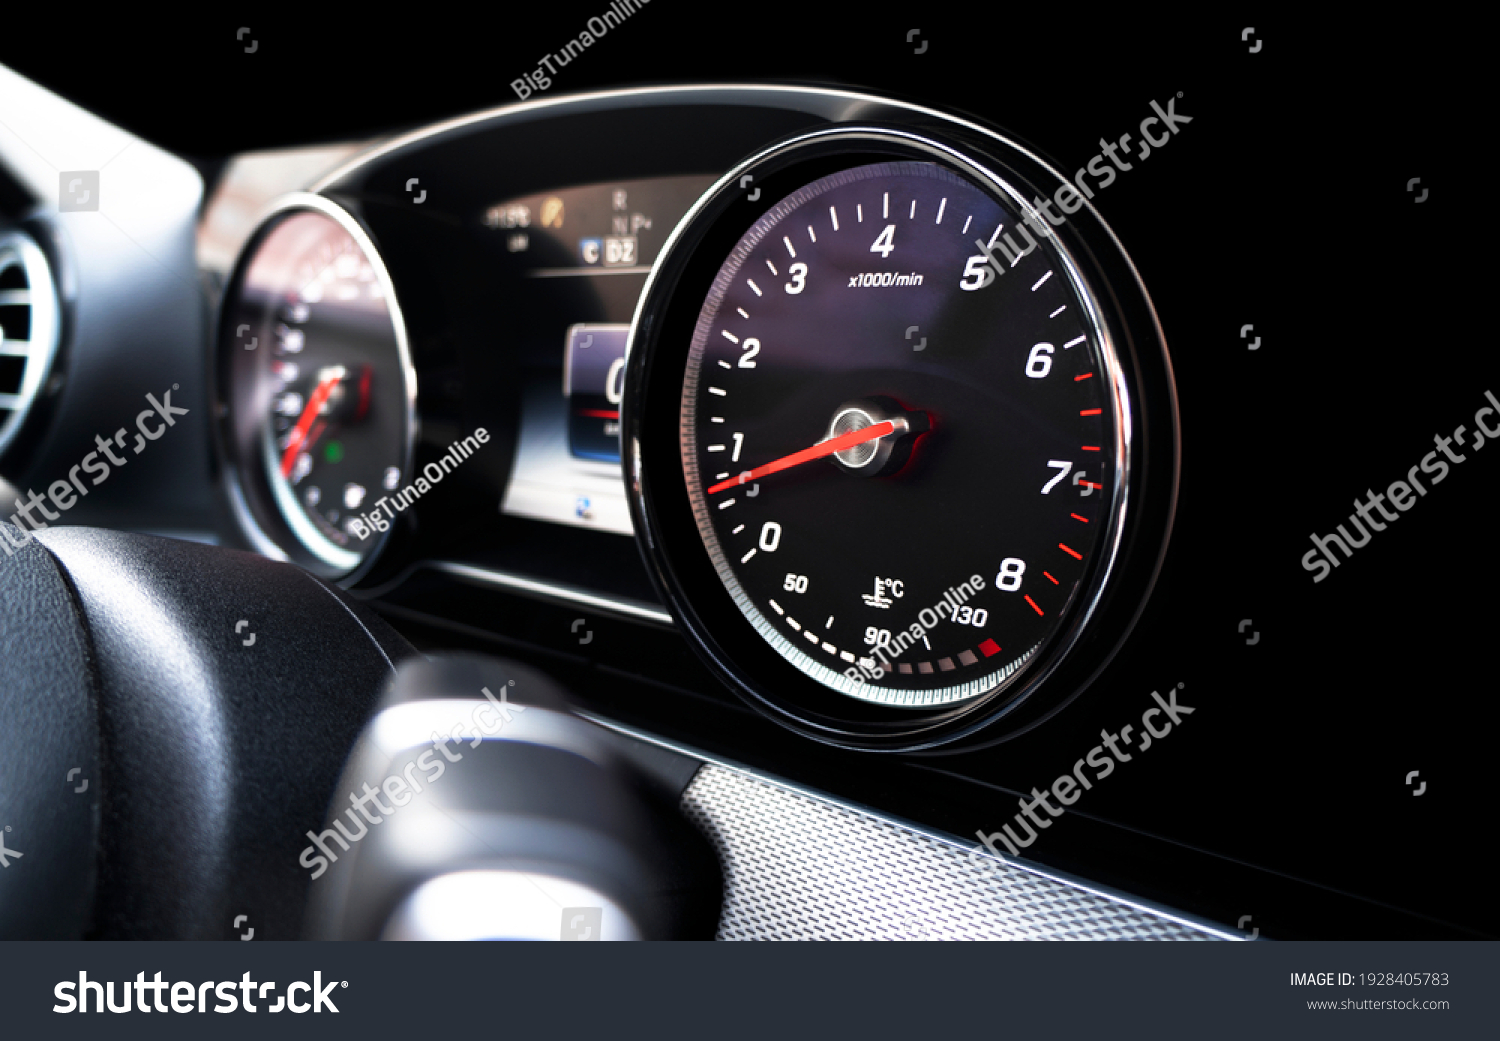 Close up shot of a speedometer in a car. Car dashboard. Dashboard details with indication lamps. Car instrument panel. Dashboard with speedometer, tachometer, odometer. Car detailing. #1928405783